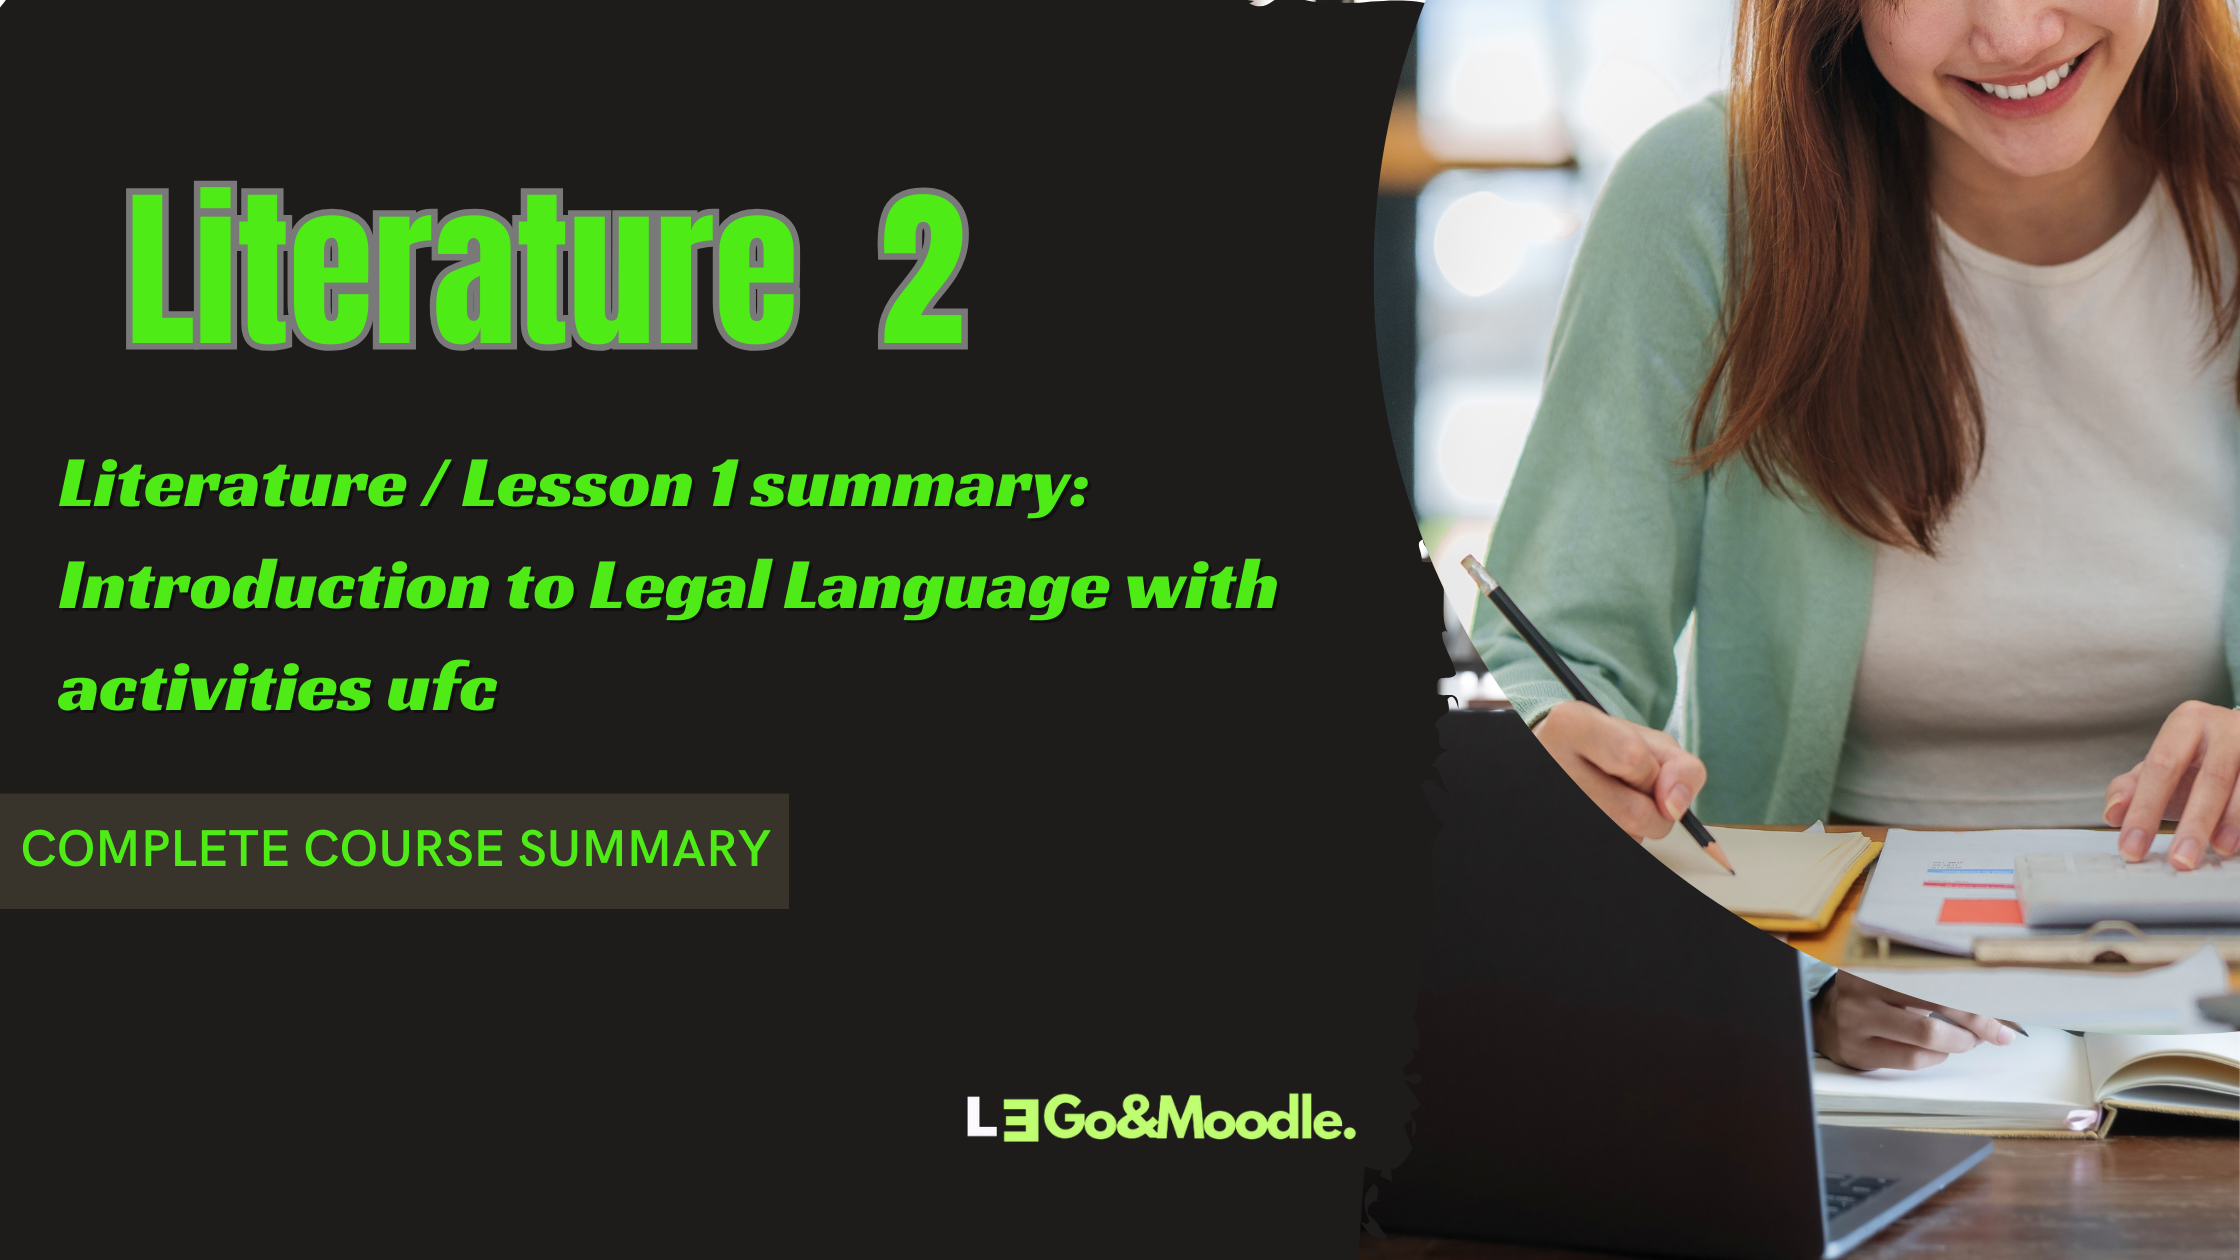 Literature / Lesson 1 summary: Introduction to Legal Language with activities ufc Part II